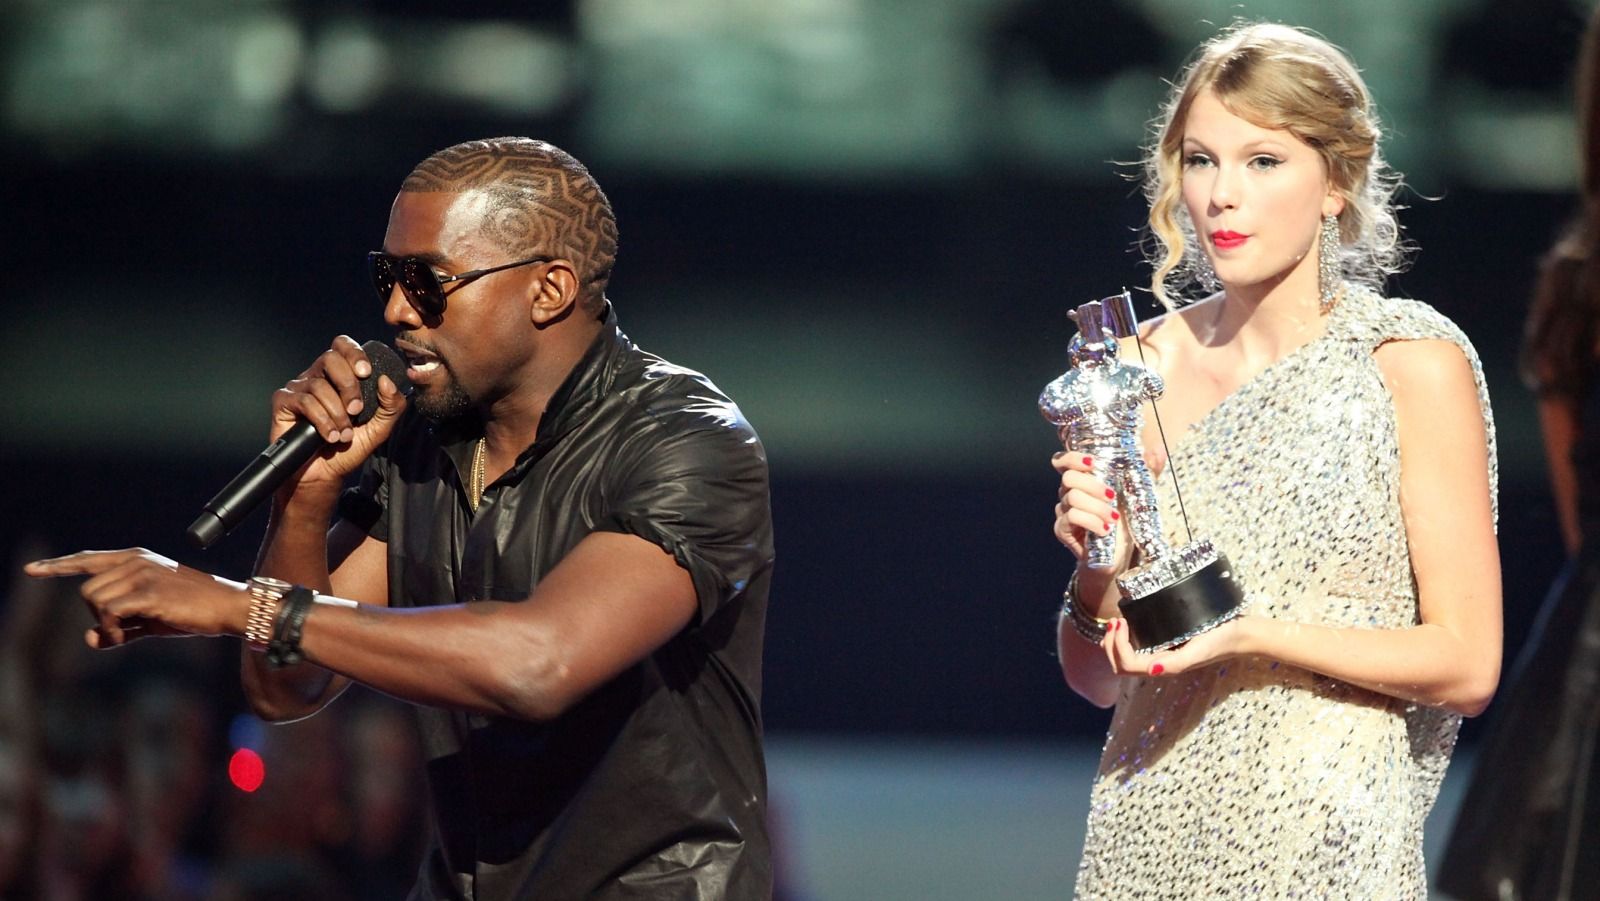 What Was Kanyes Outburst At The MTV Music Awards